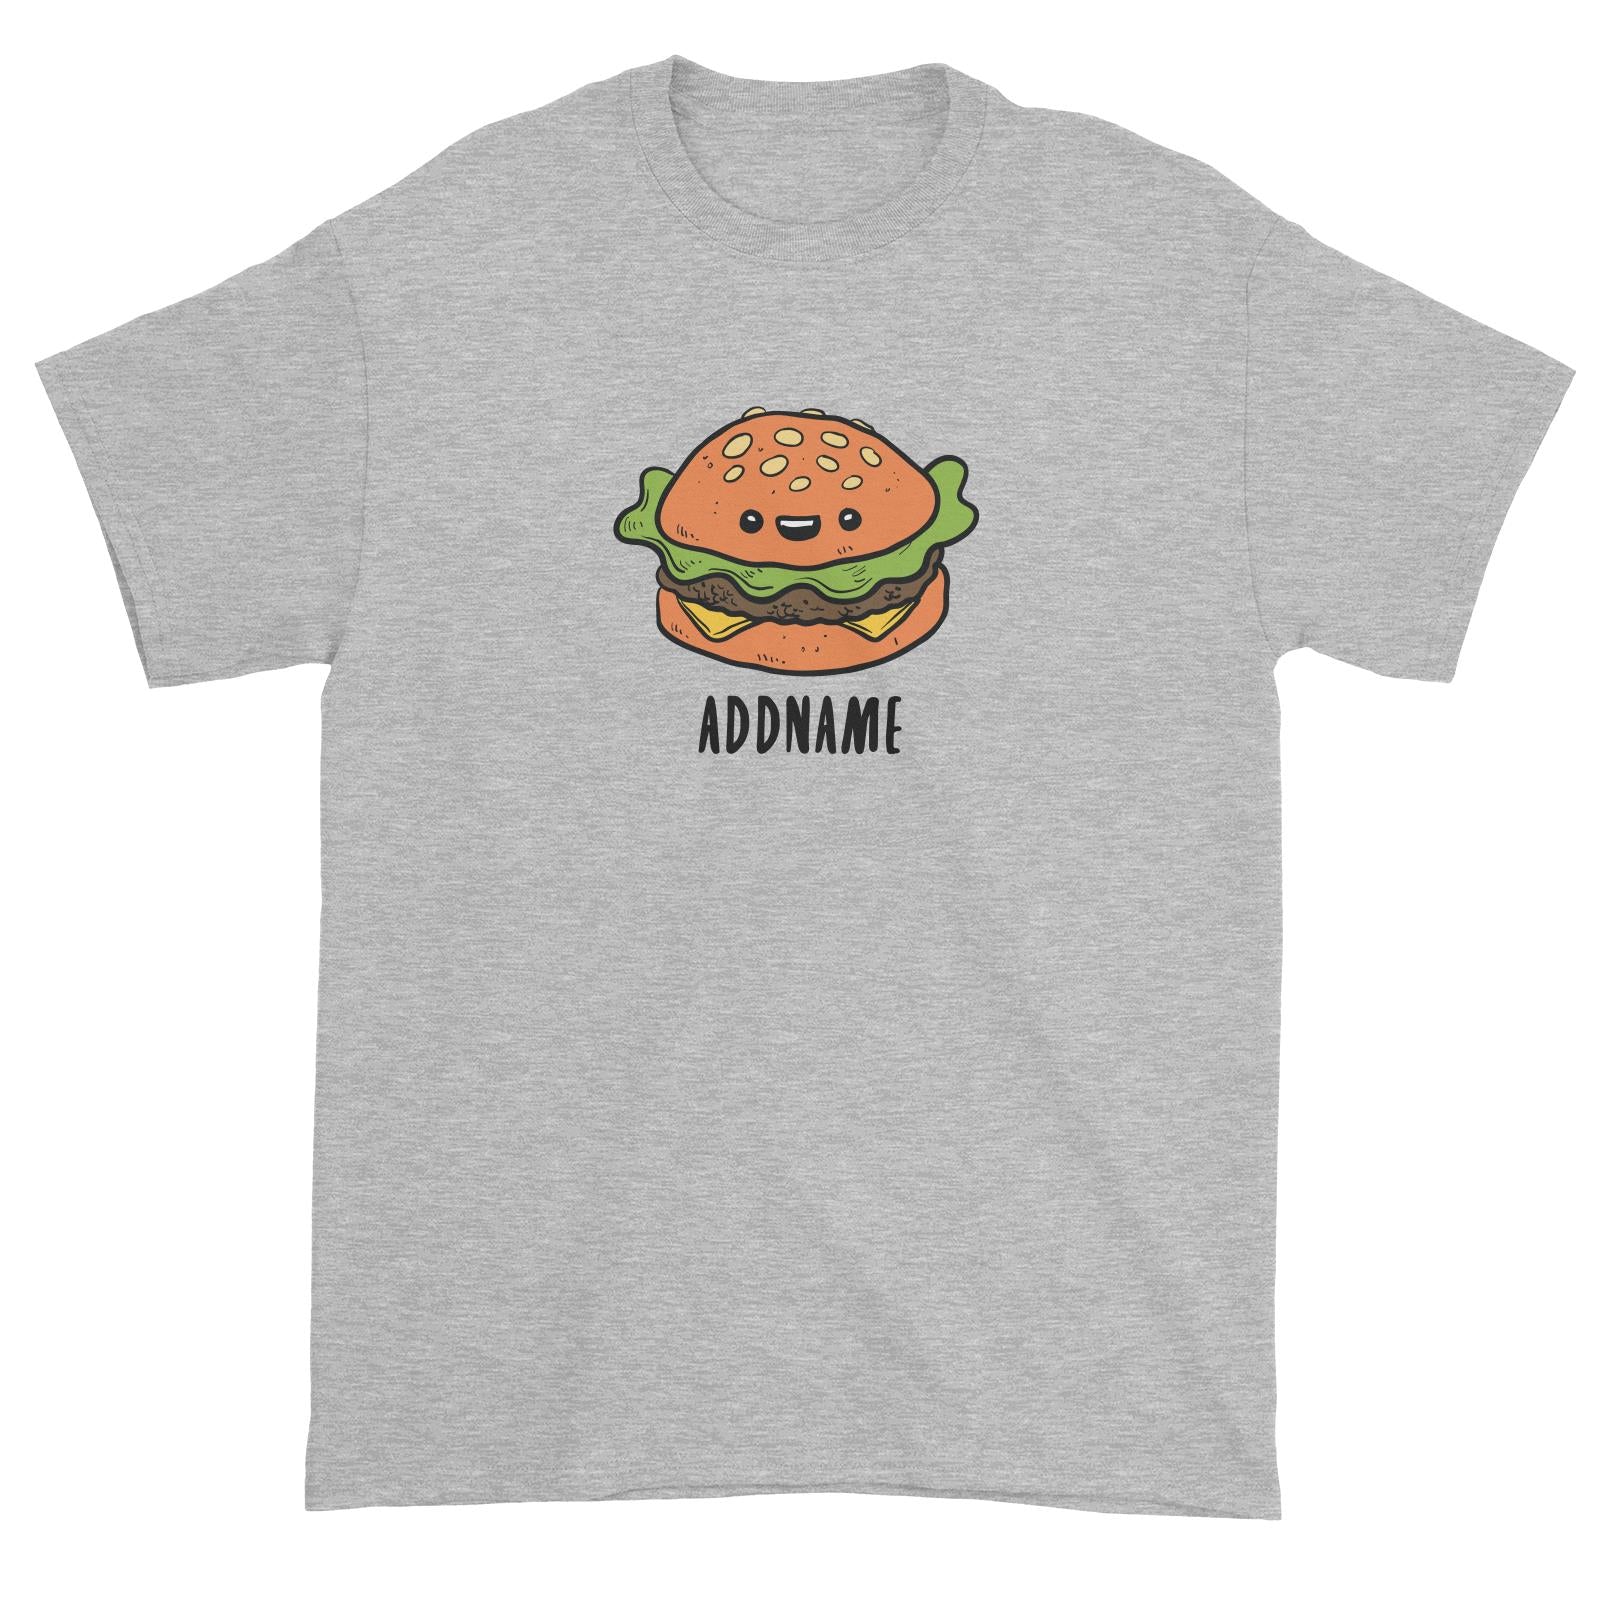 Fast Food Burger Addname Unisex T-Shirt  Matching Family Comic Cartoon Personalizable Designs